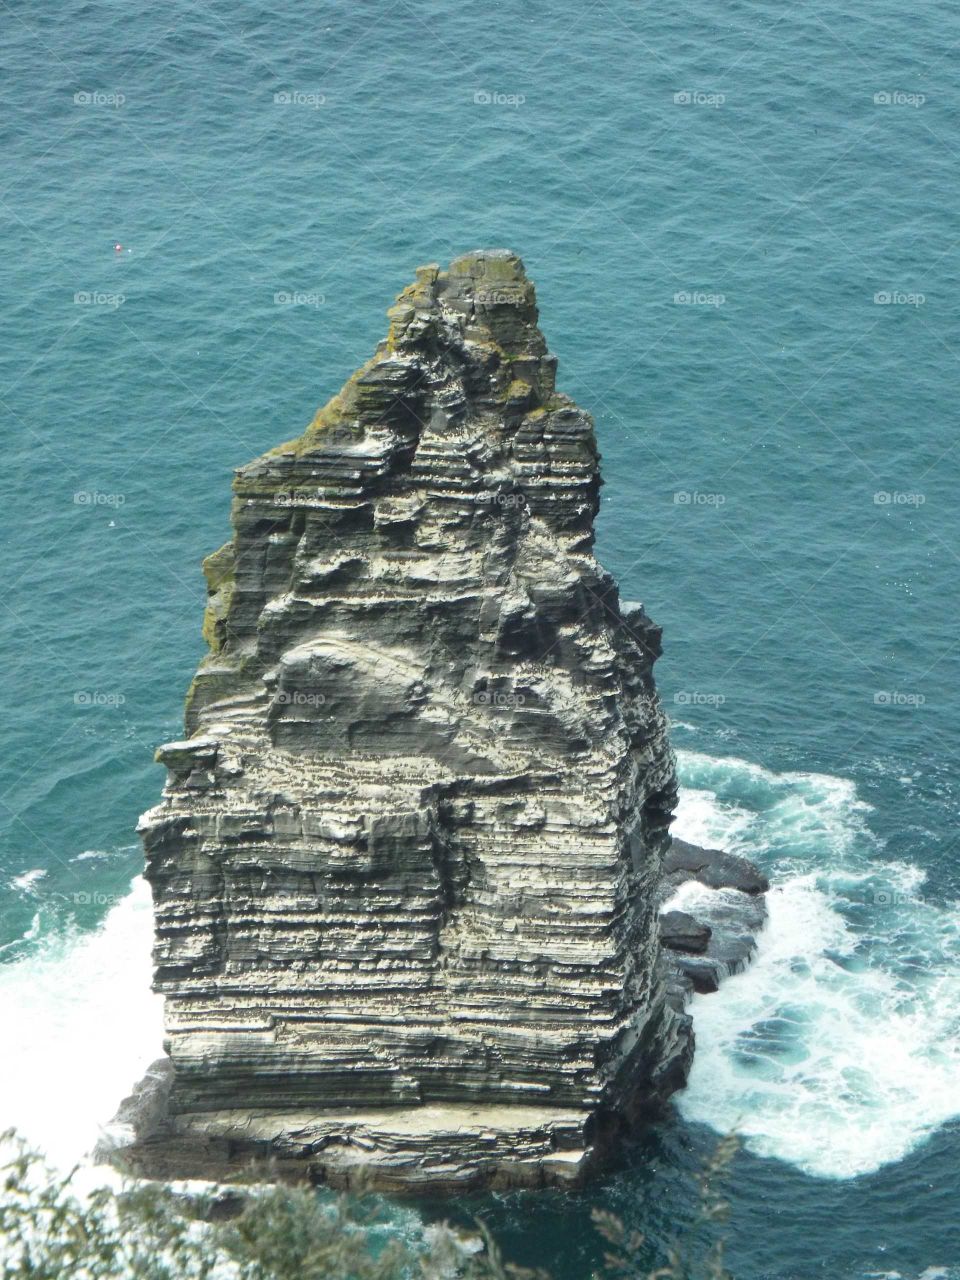 One of the large rocks off of the shore of the Cliffs of Moher in Ireland.